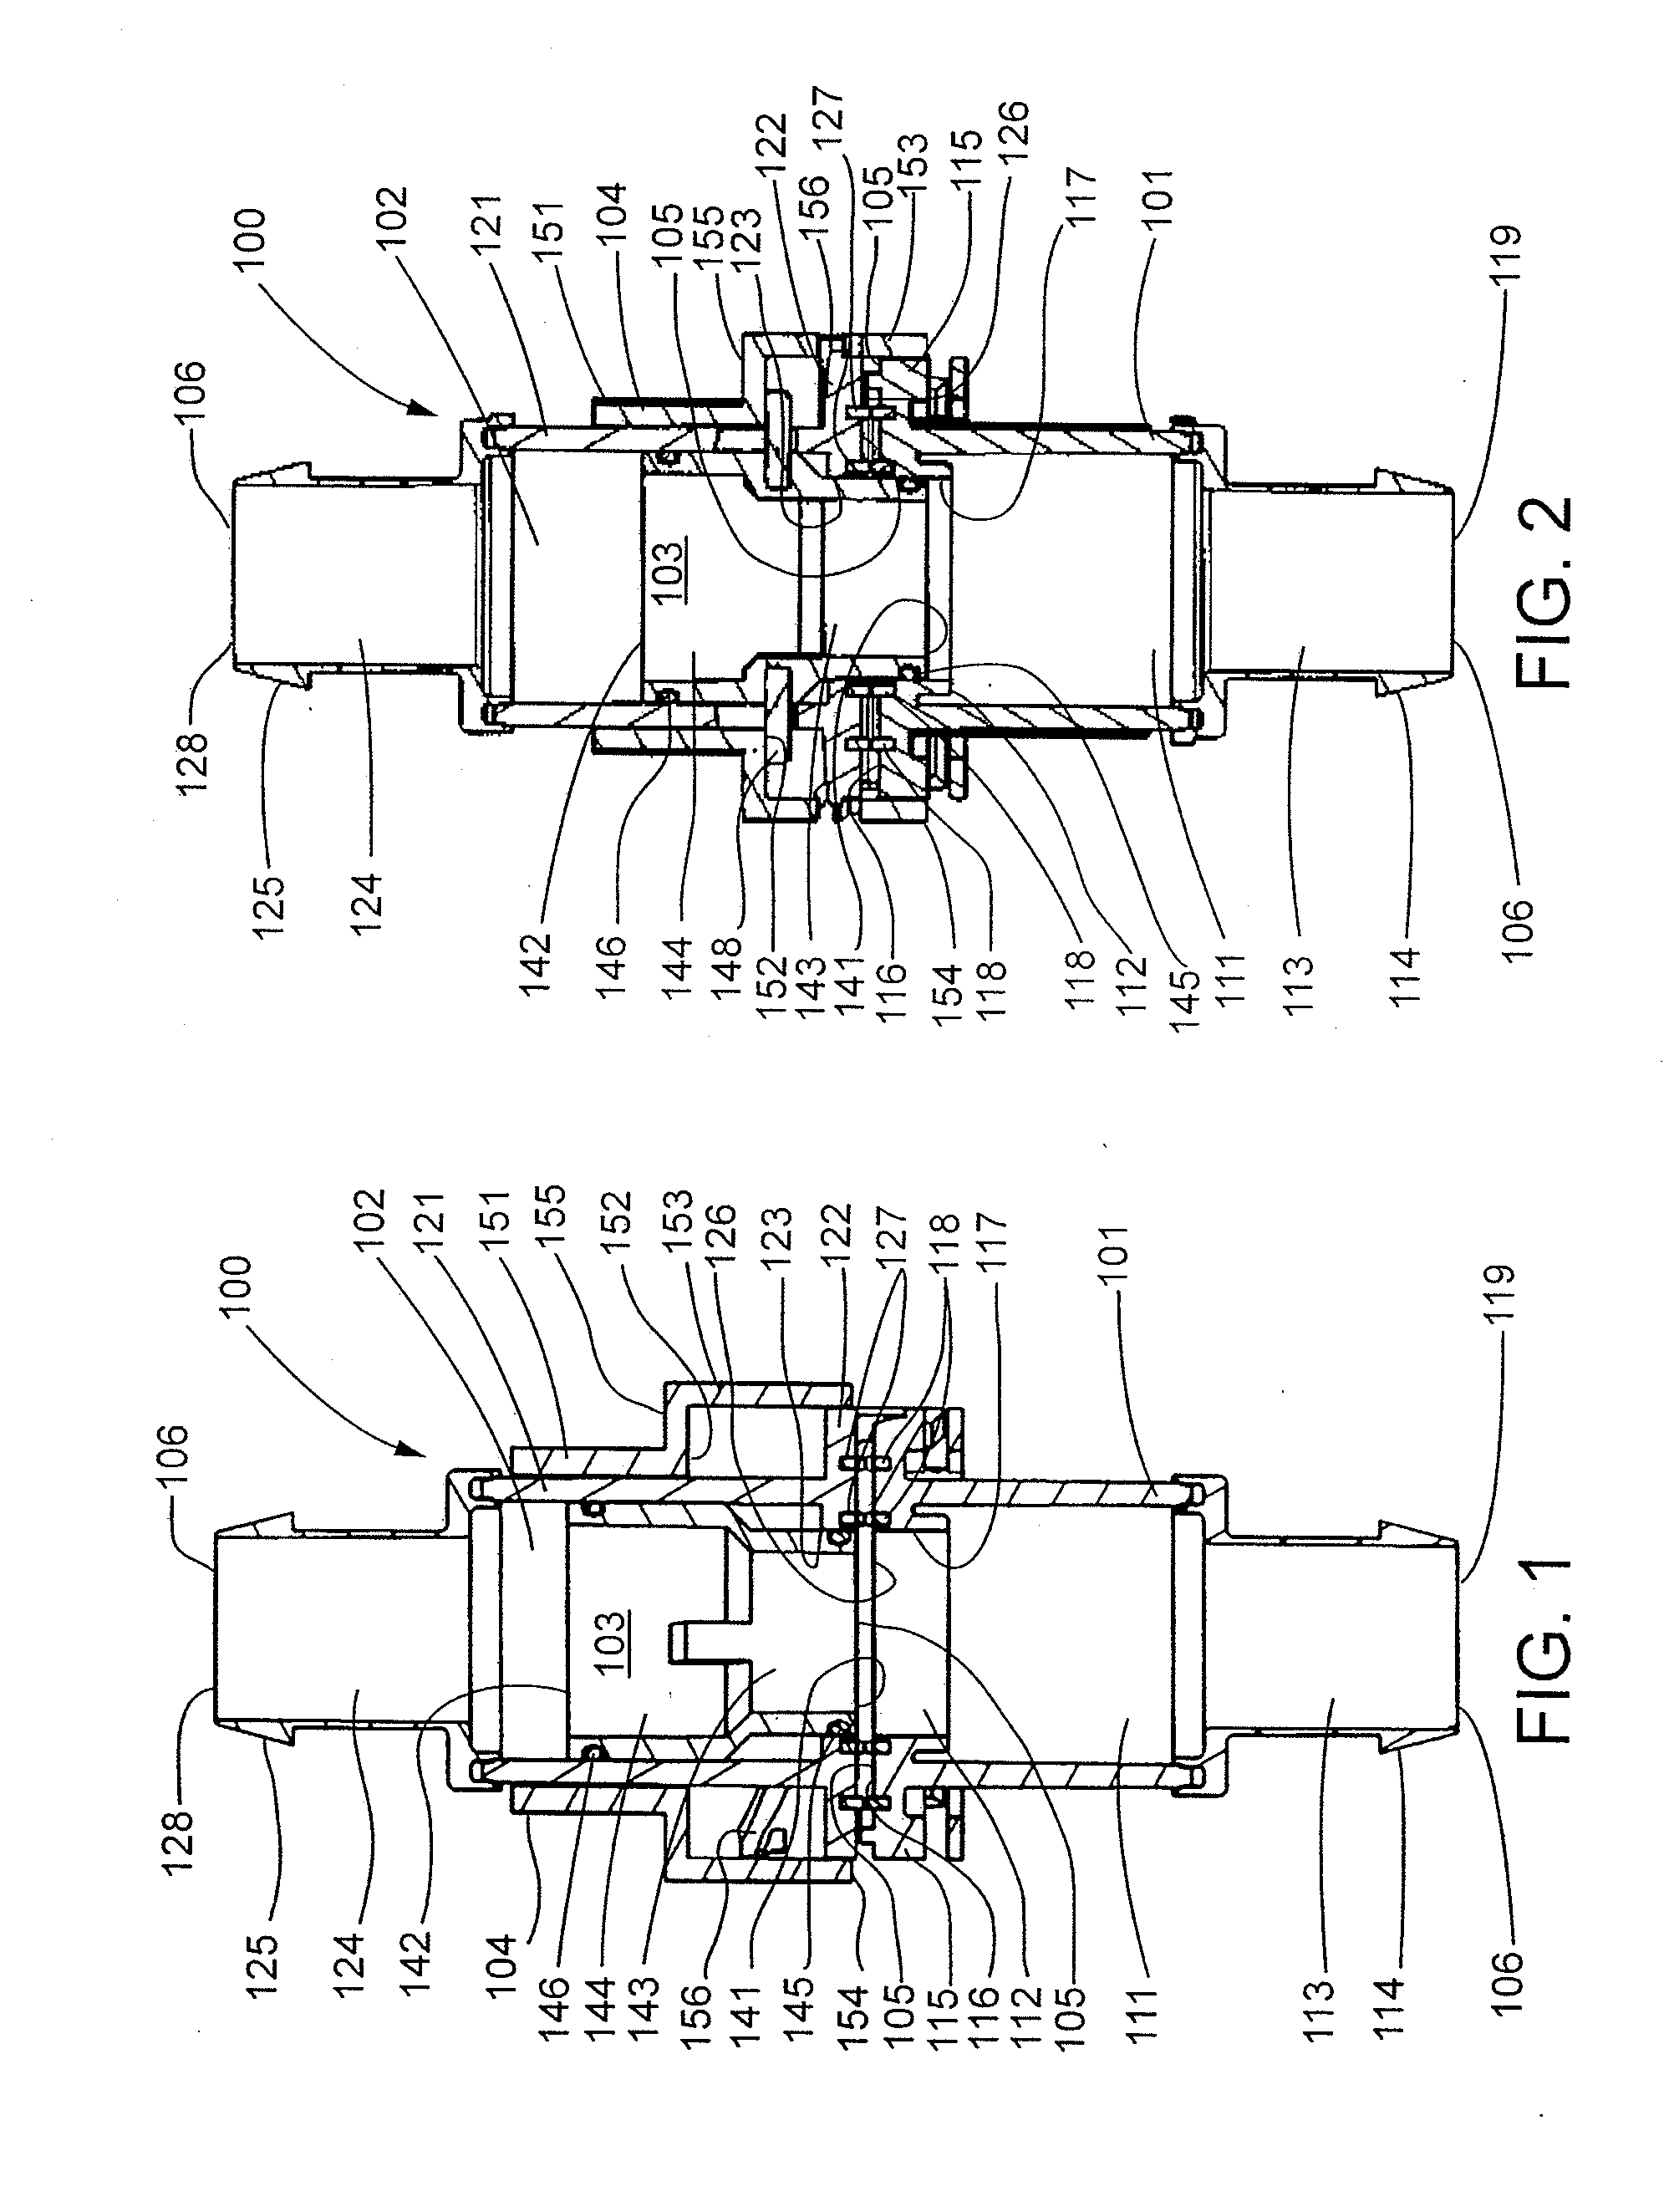 Connector assemblies, fluid systems including connector assemblies, and procedures for making fluid connections